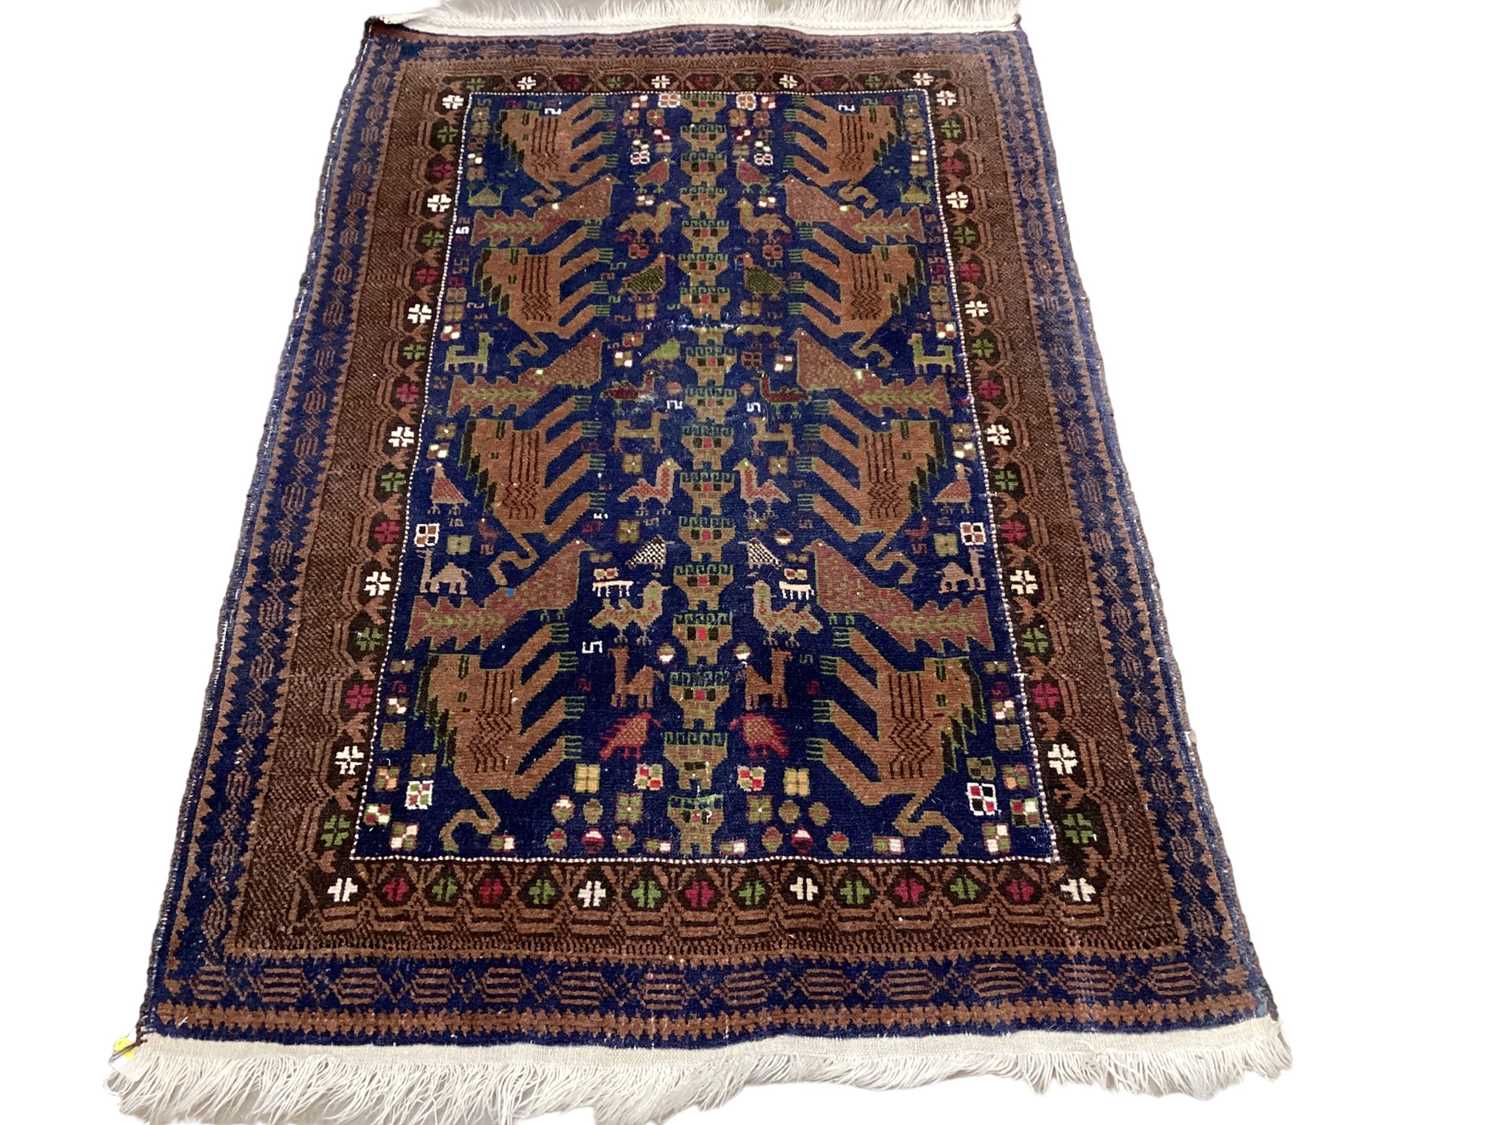 Chinese rug together with a narrow Persian rug - Image 3 of 5